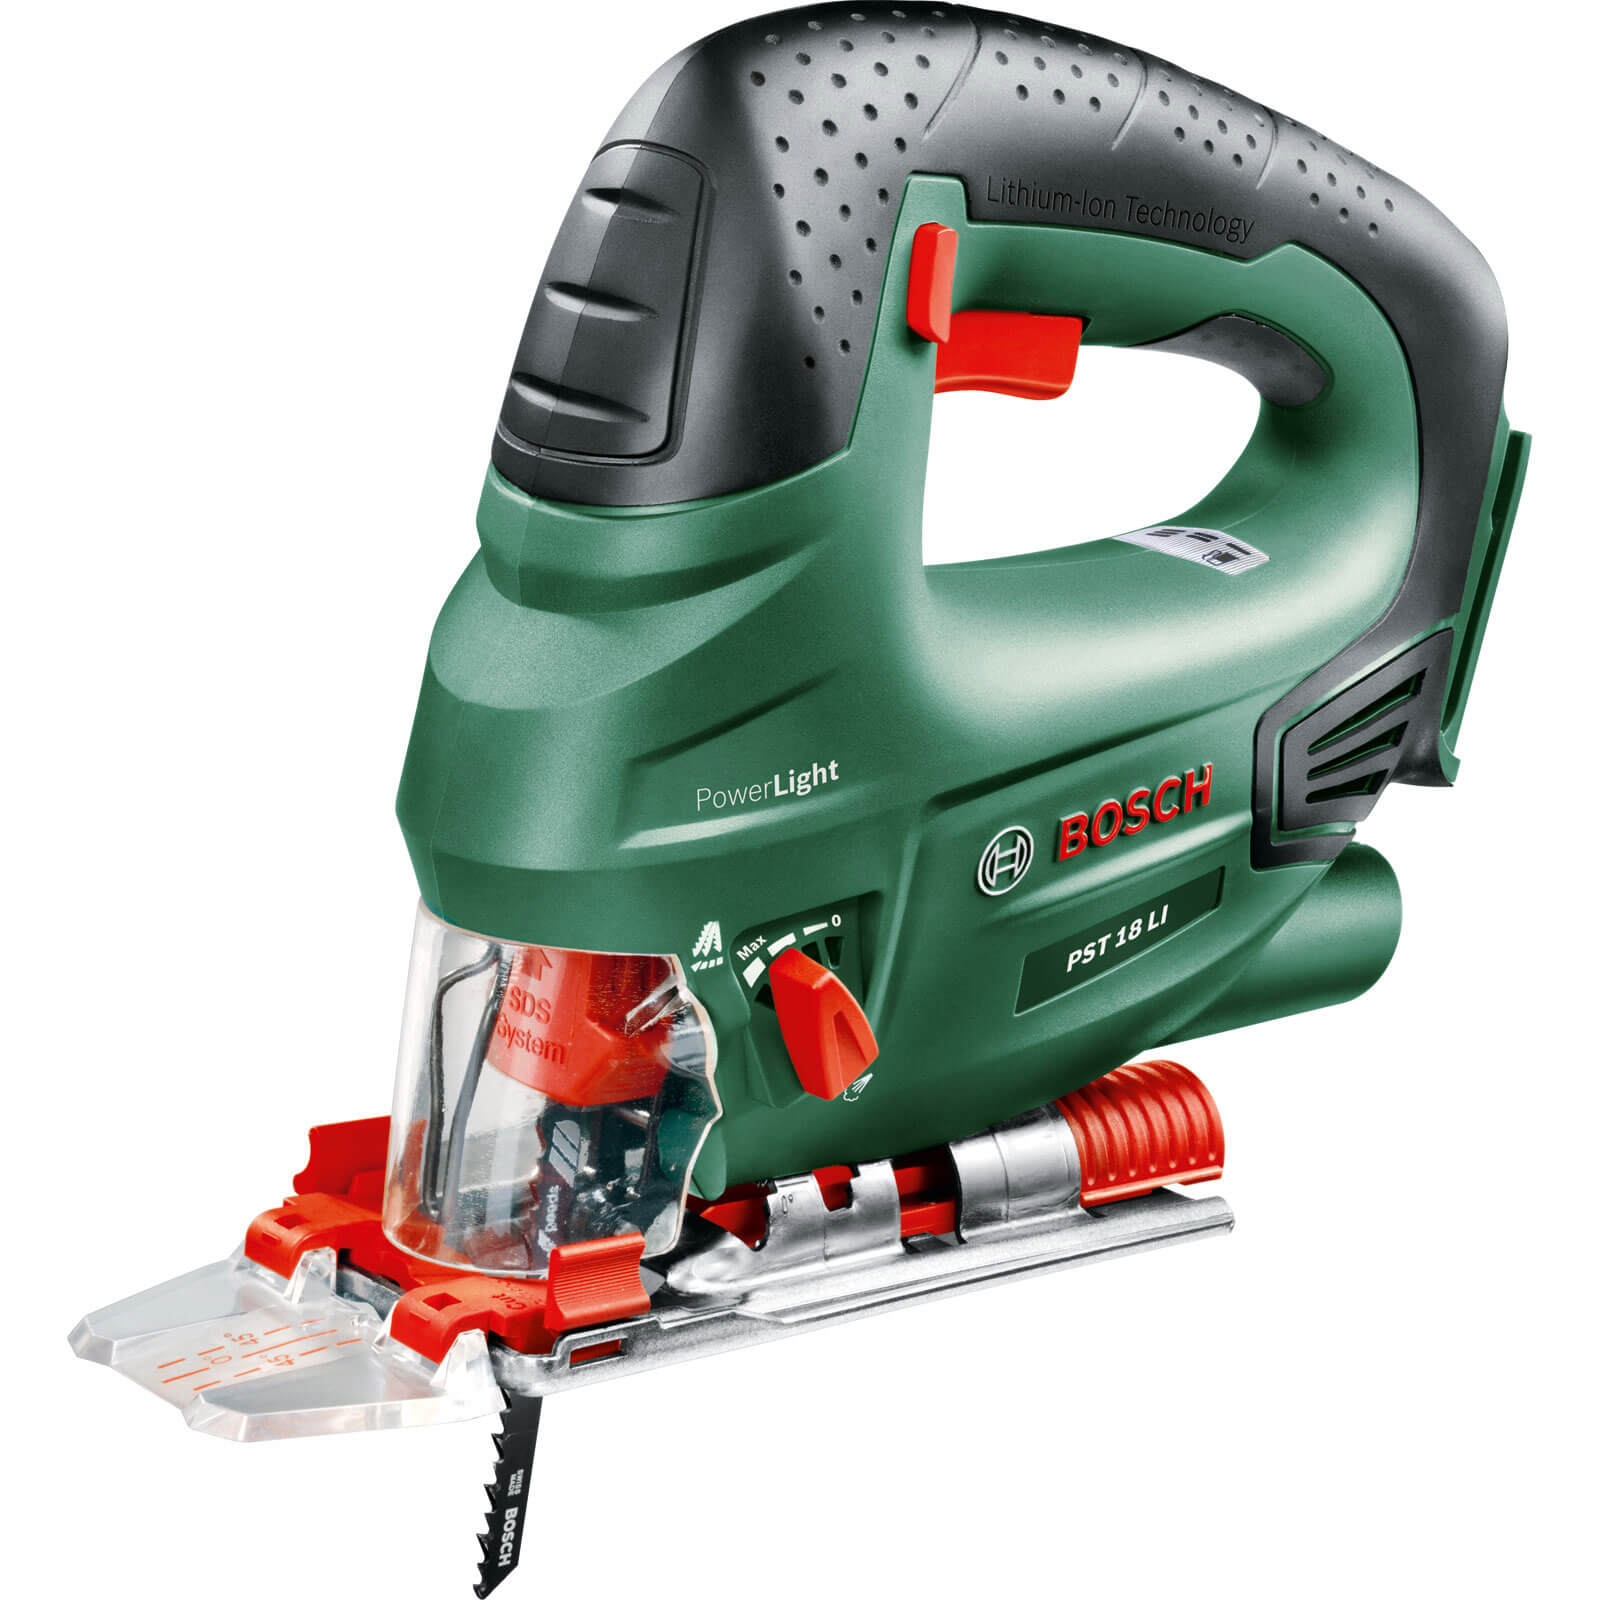 Bosch POWER4ALL PST 18 LI 18v Cordless Jigsaw without Battery or Charger